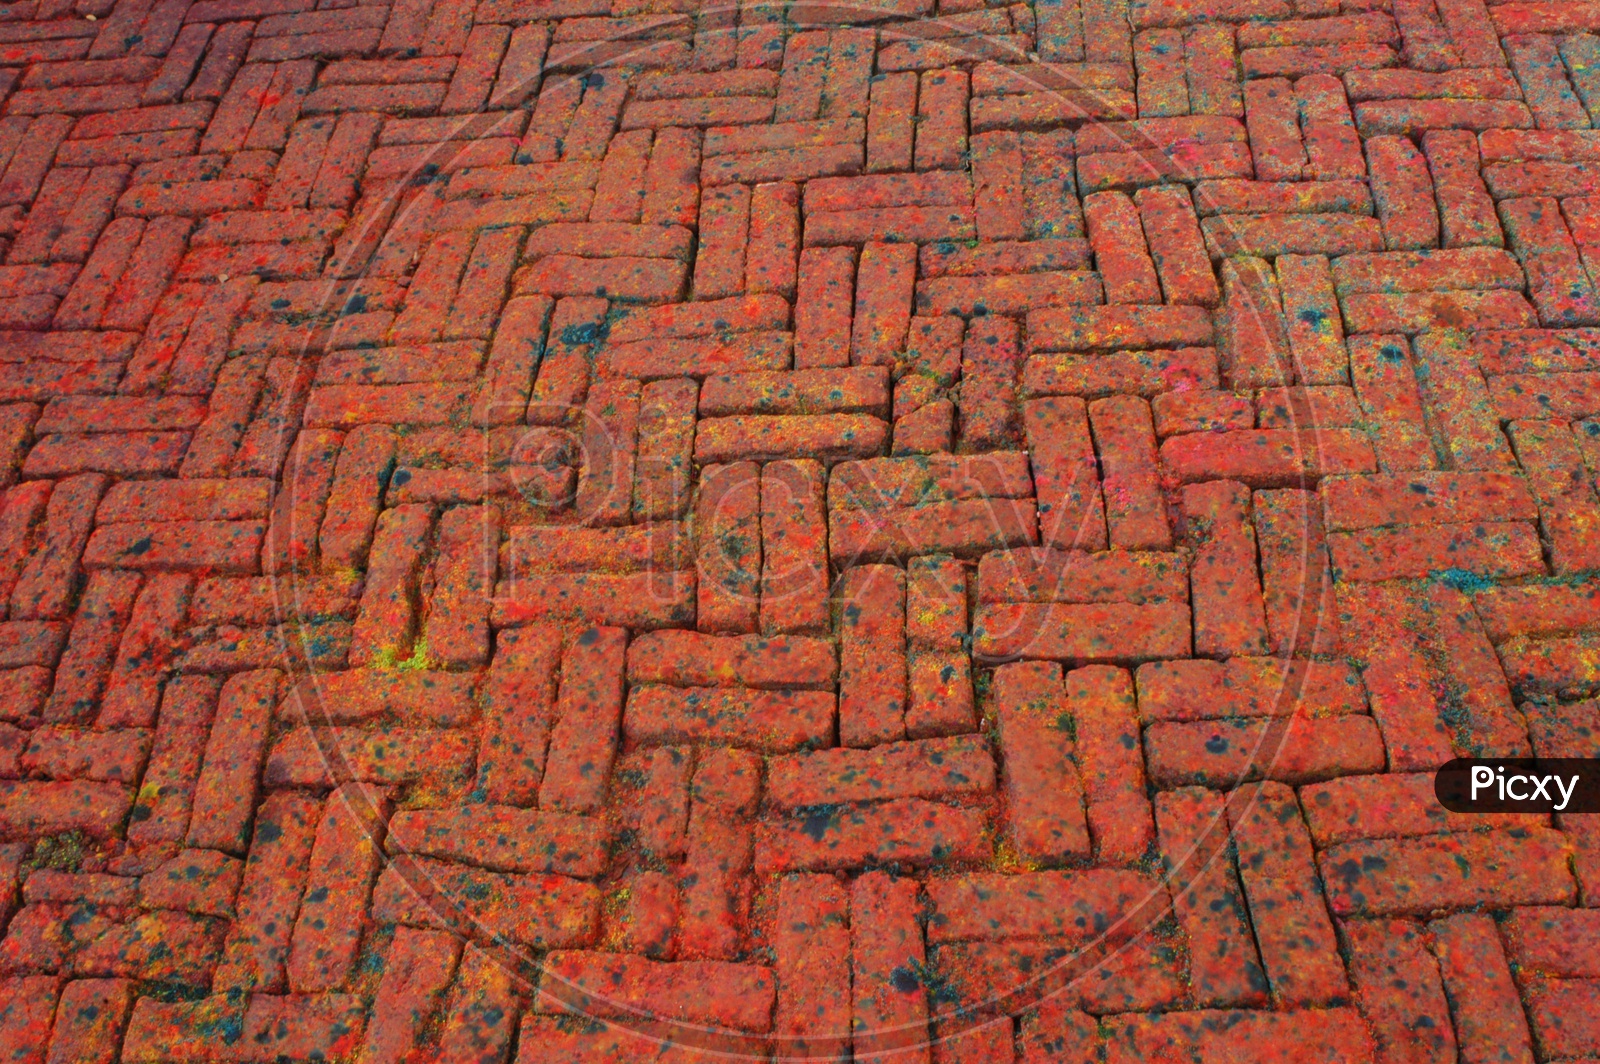 Texture And Patterns Of Colour Fell On Floor